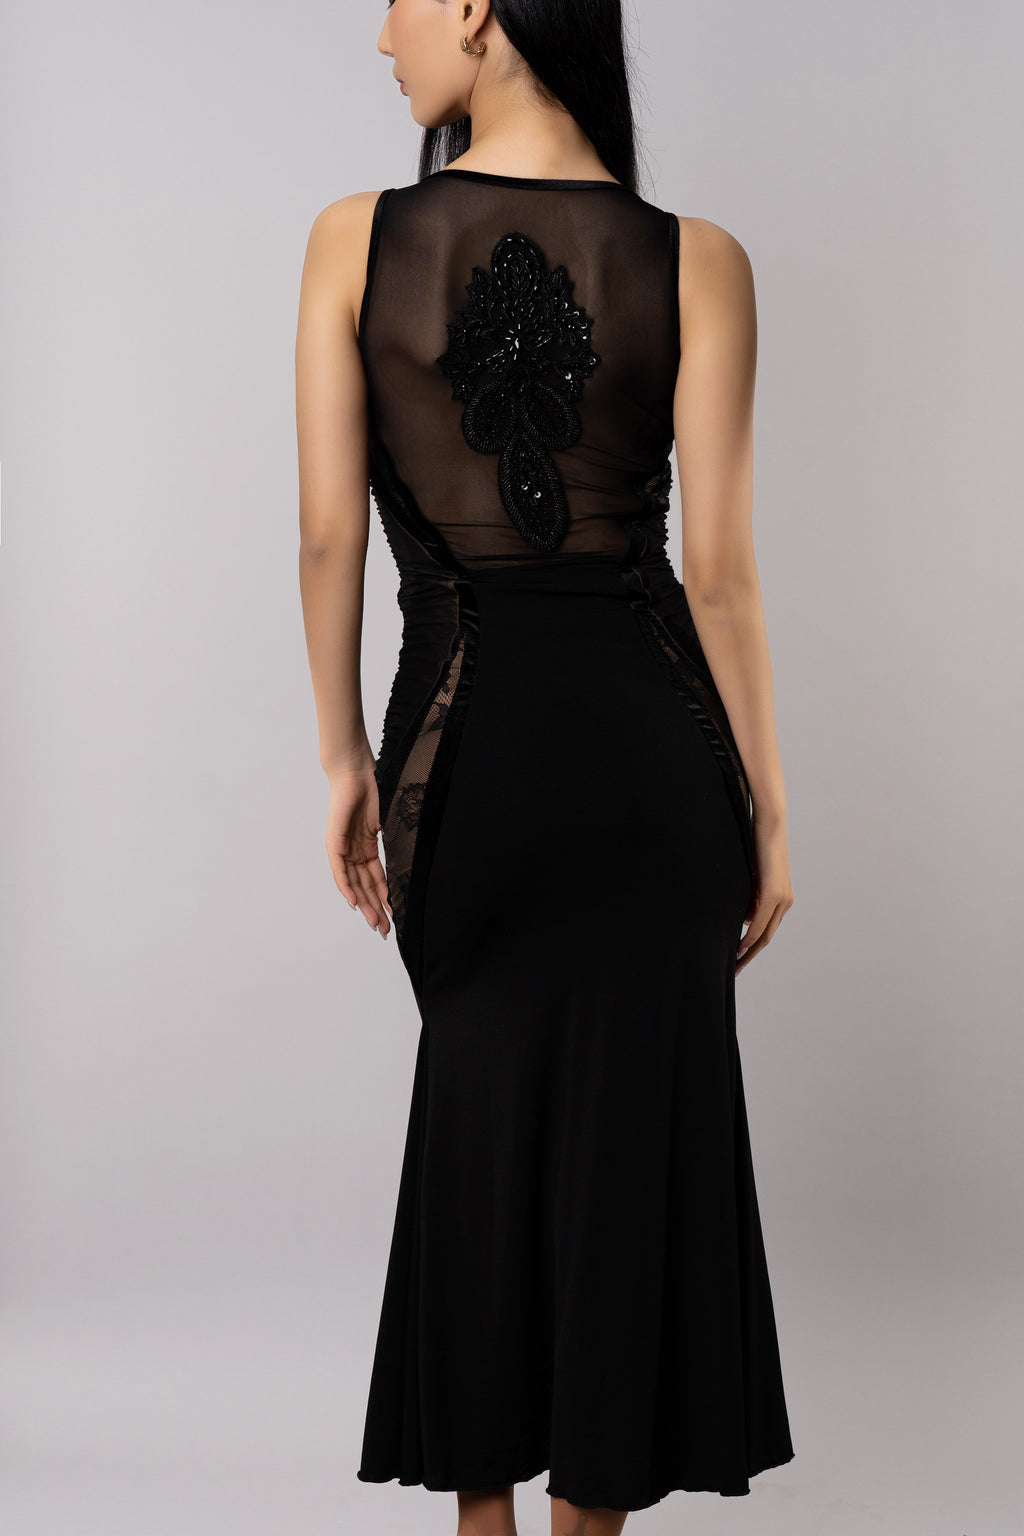 DQ-533 Tailor-Made Cinched Waist Sensual Tattoo Effect Back Dress